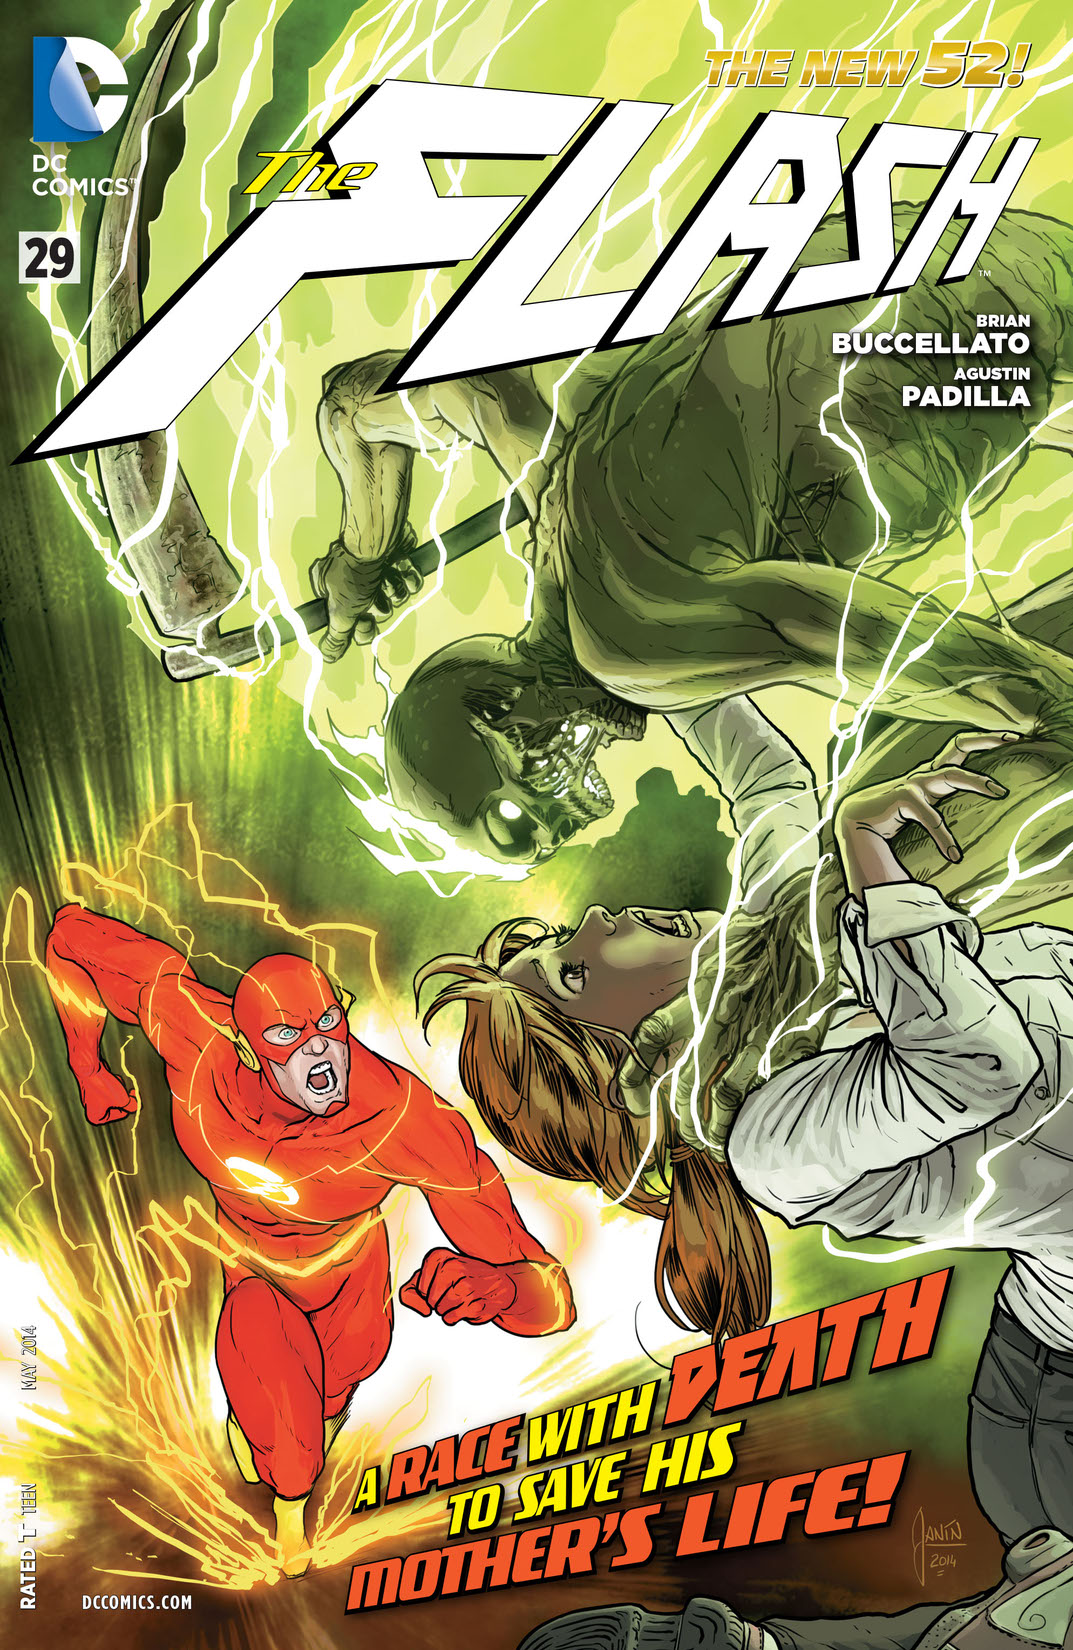 Flash (2011-) #29 preview images